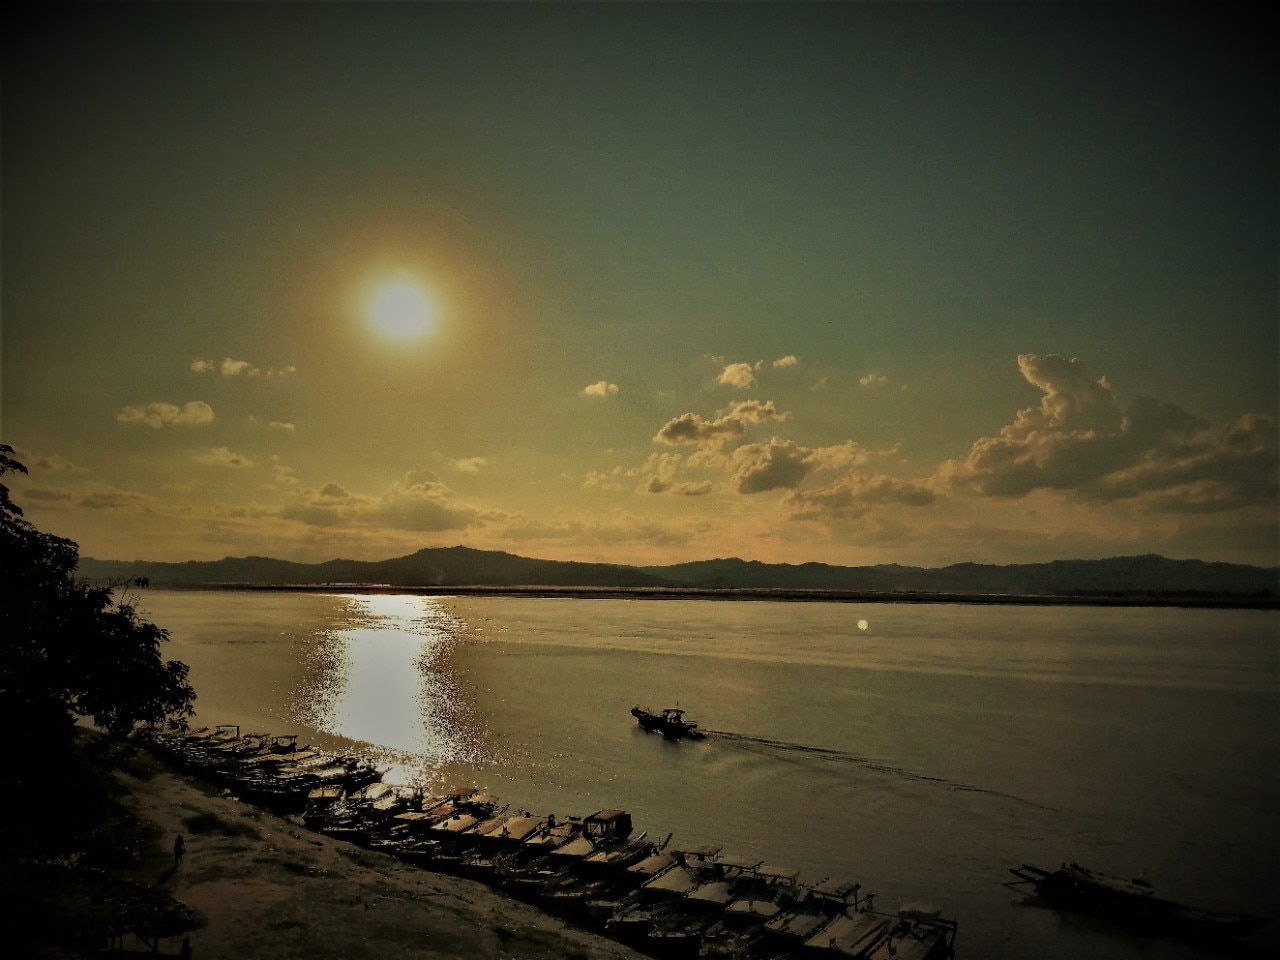 Photograph of the Ayeyarwady River in Myanmar at sunset